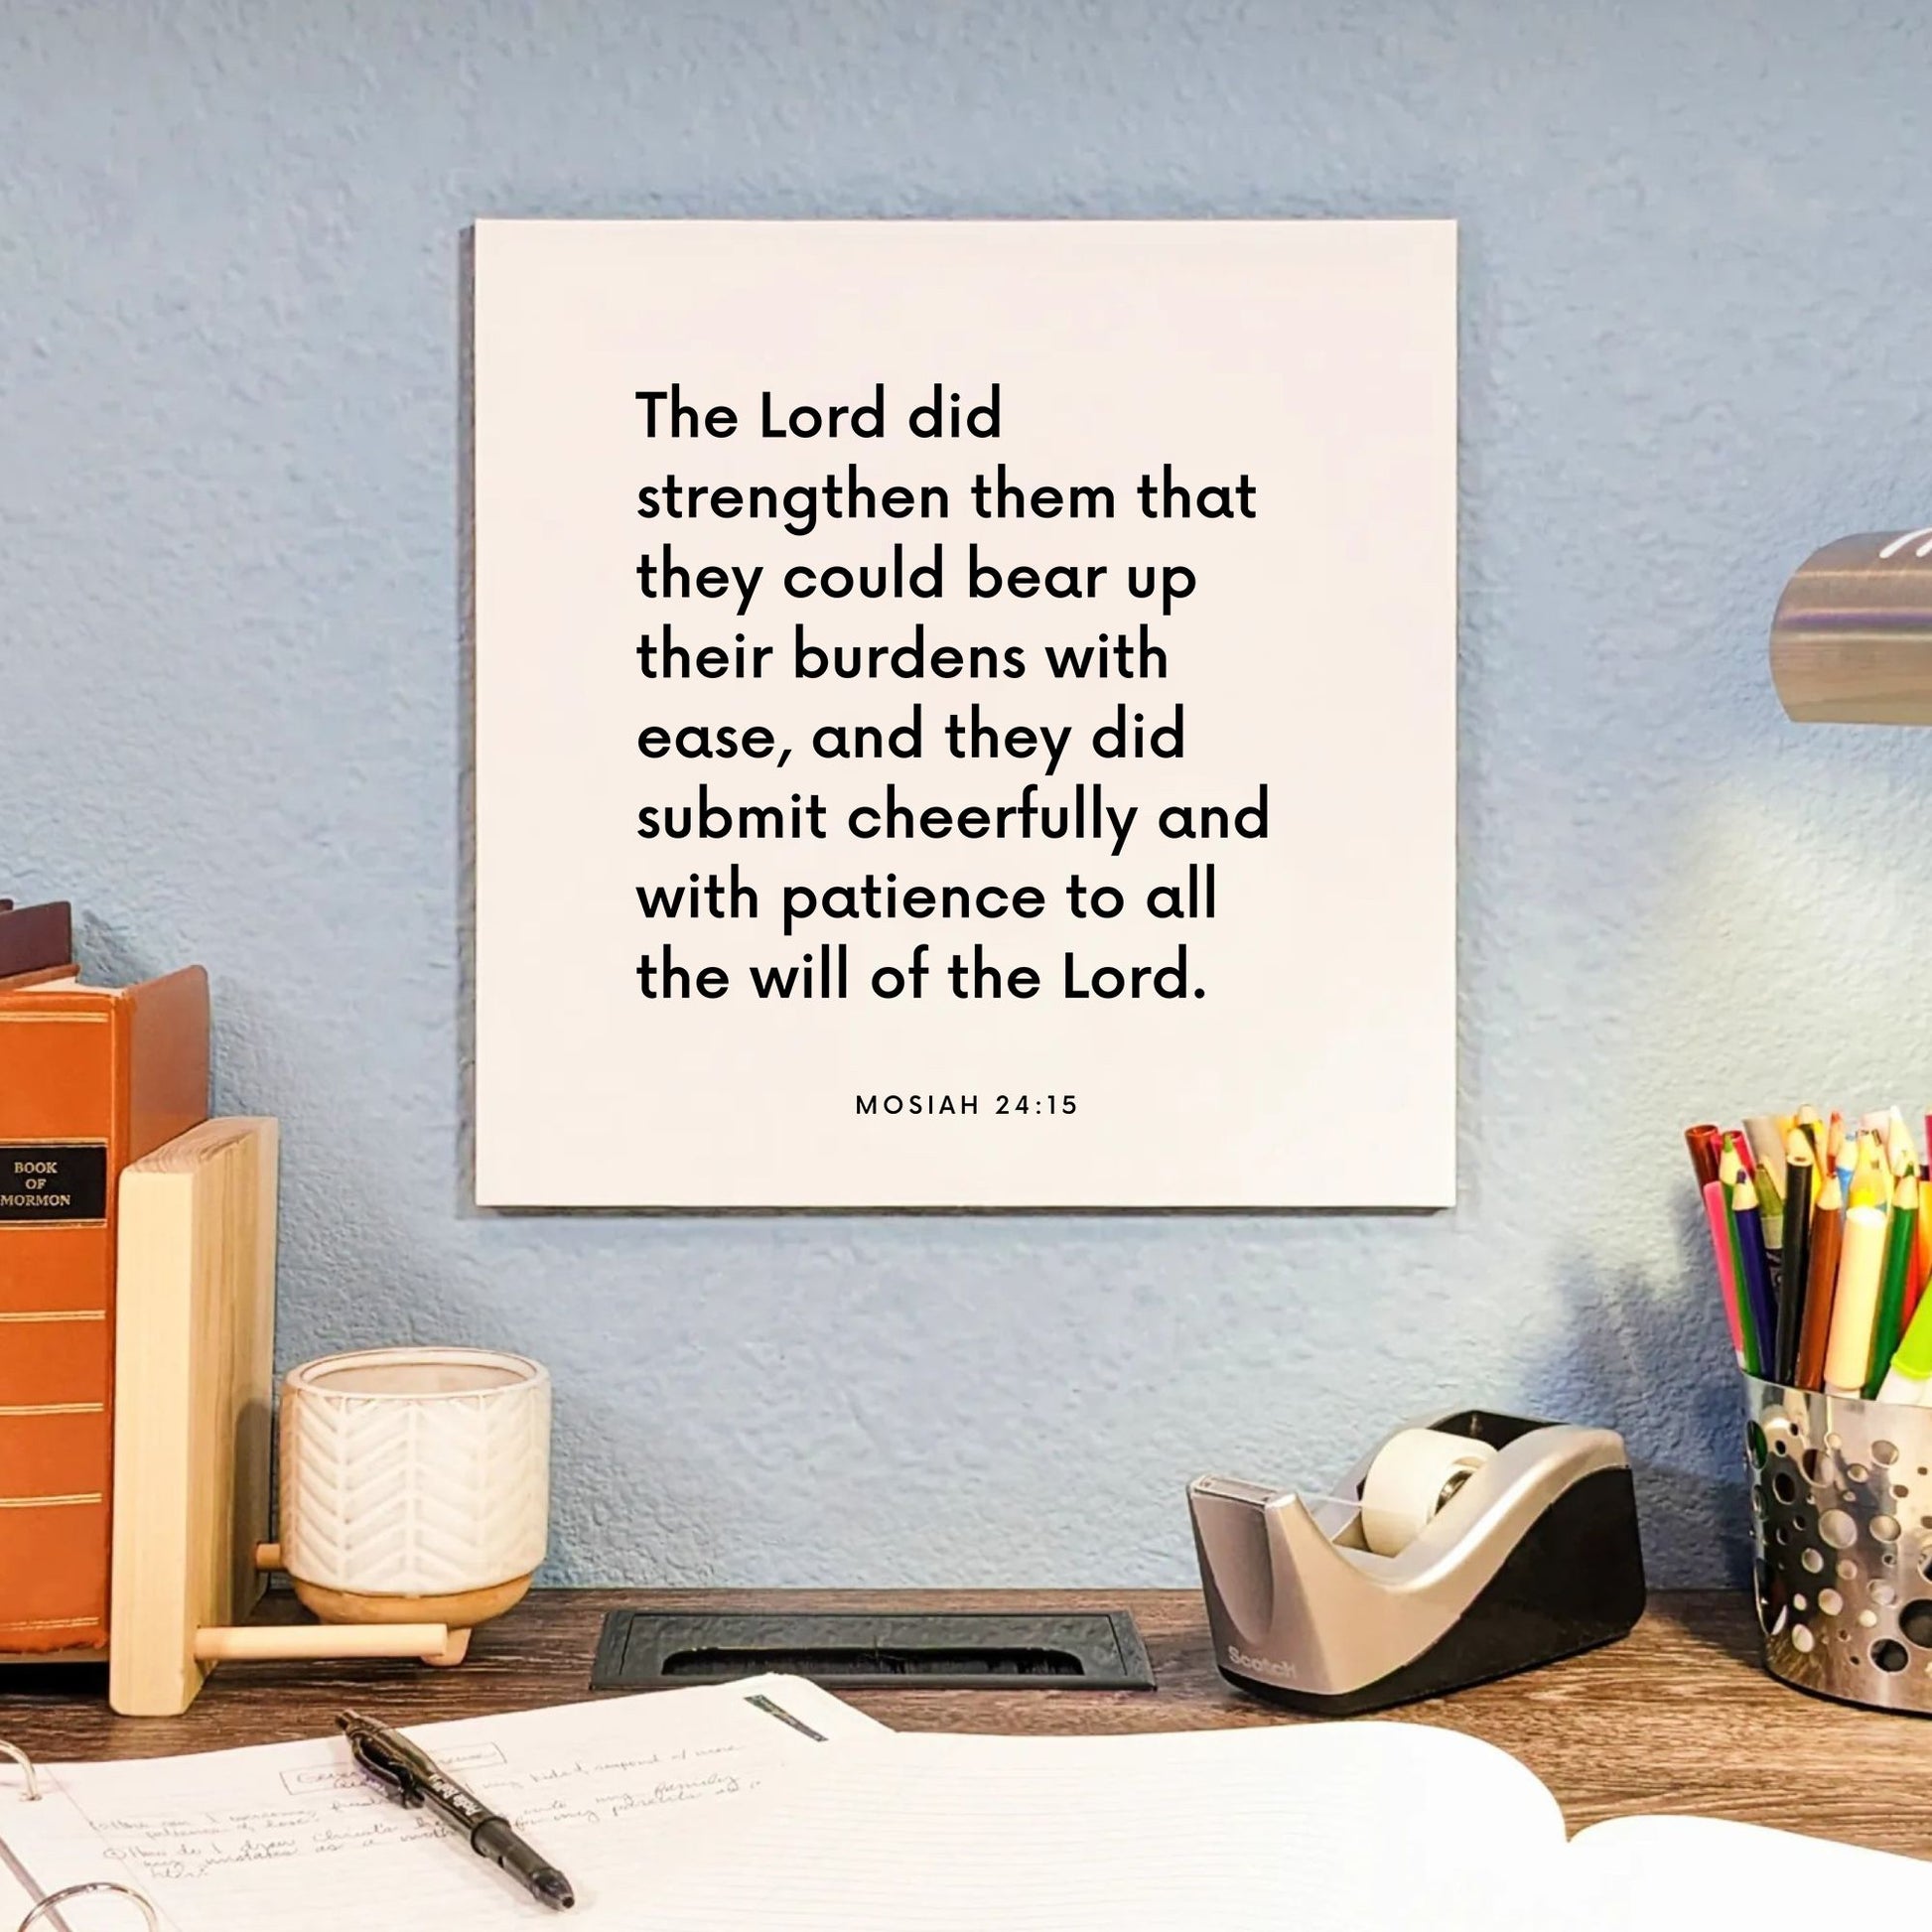 Desk mouting of the scripture tile for Mosiah 24:15 - "They did submit cheerfully and with patience"